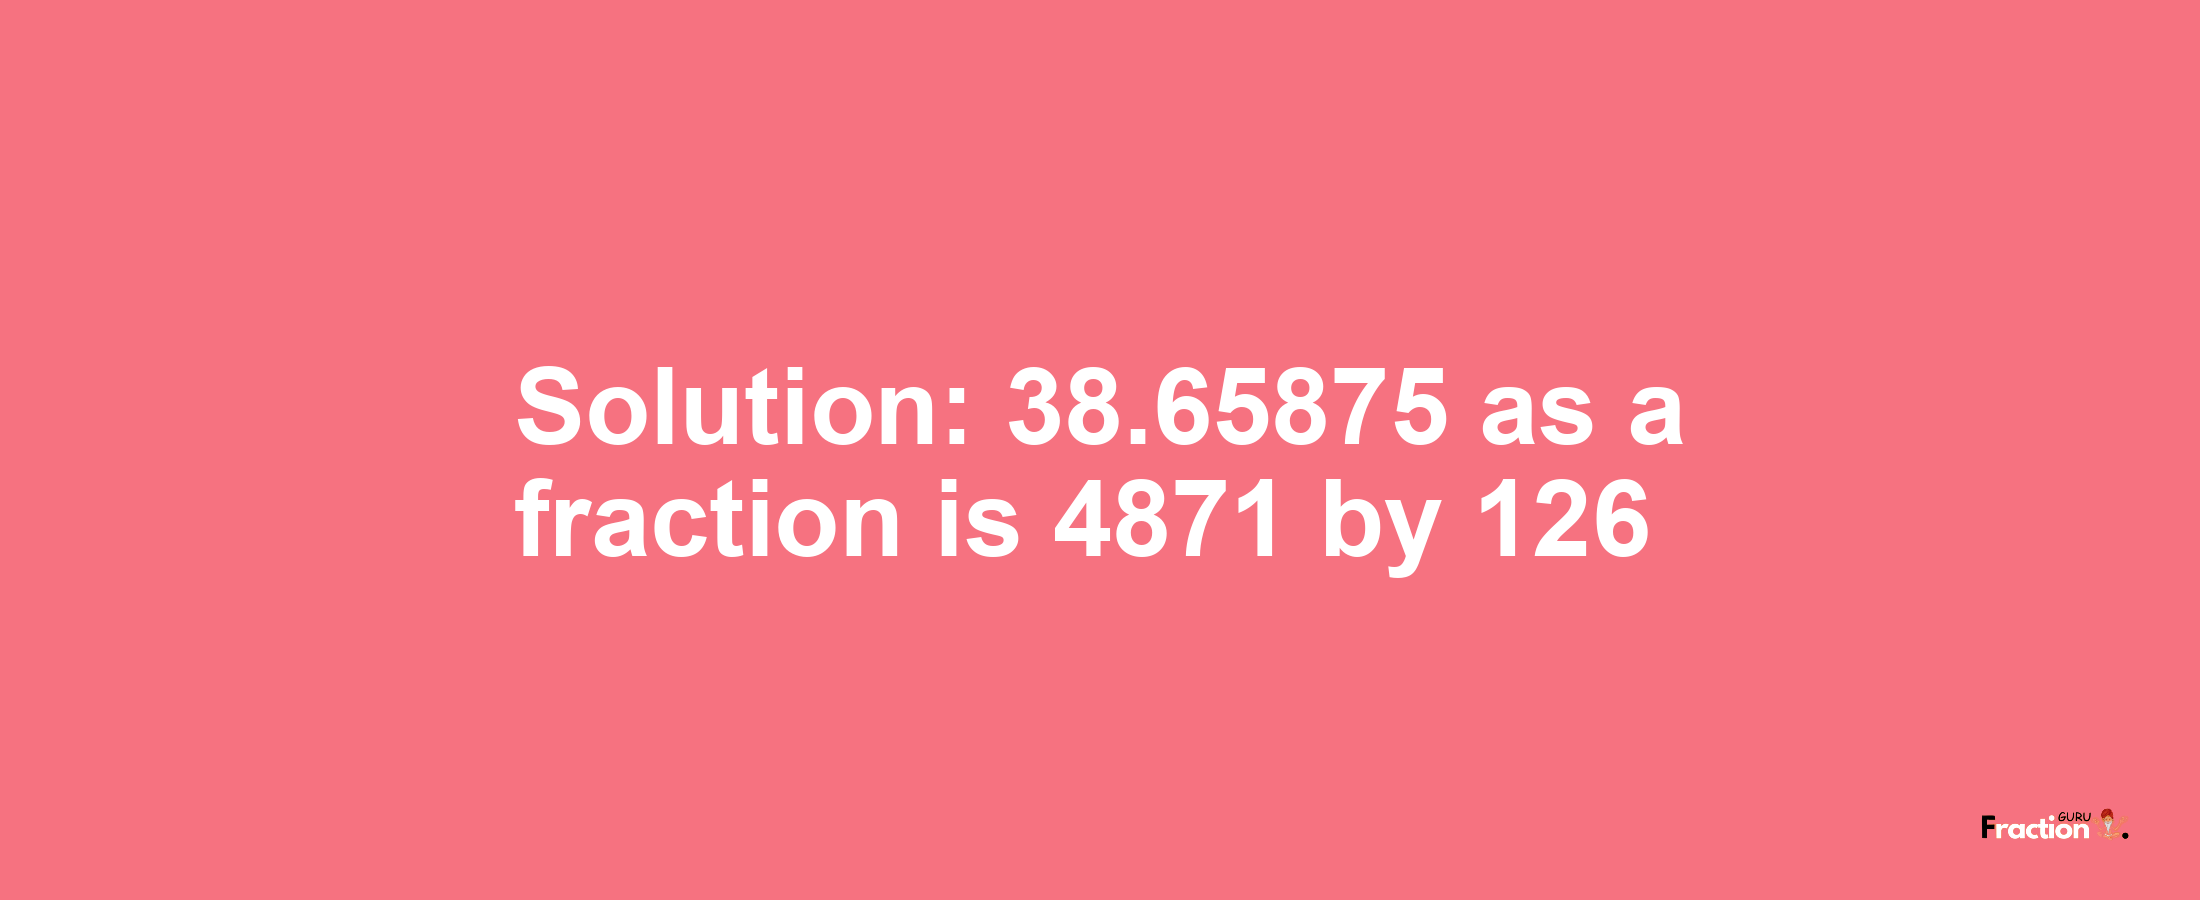 Solution:38.65875 as a fraction is 4871/126